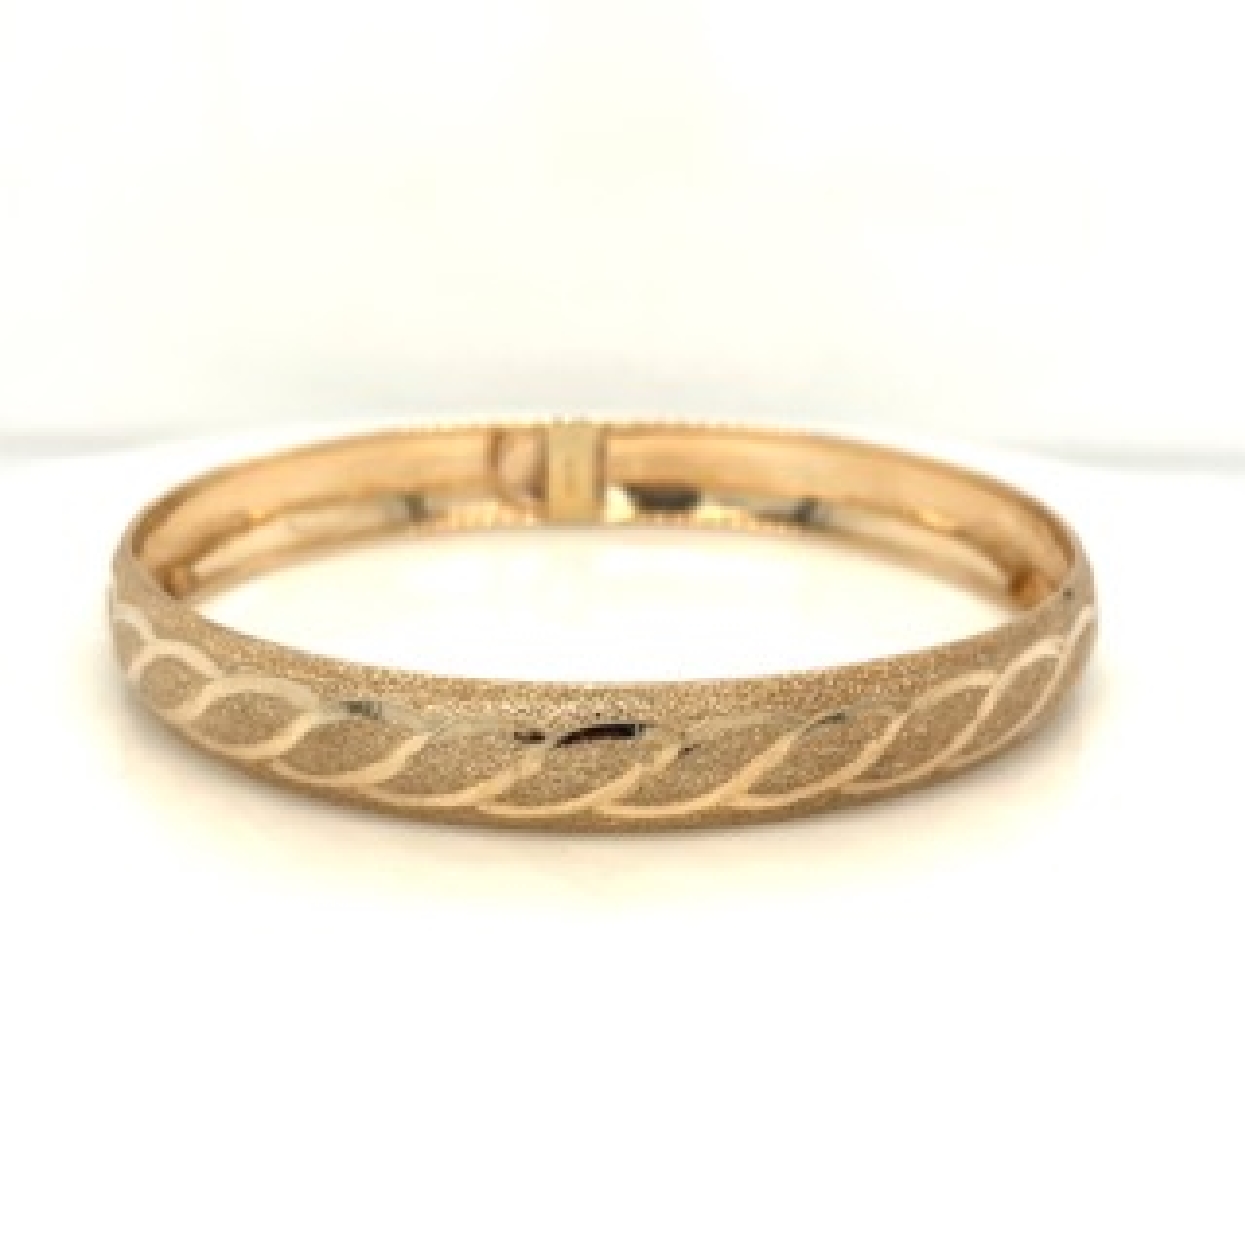 10K Yellow Gold Bangle with Textured Details